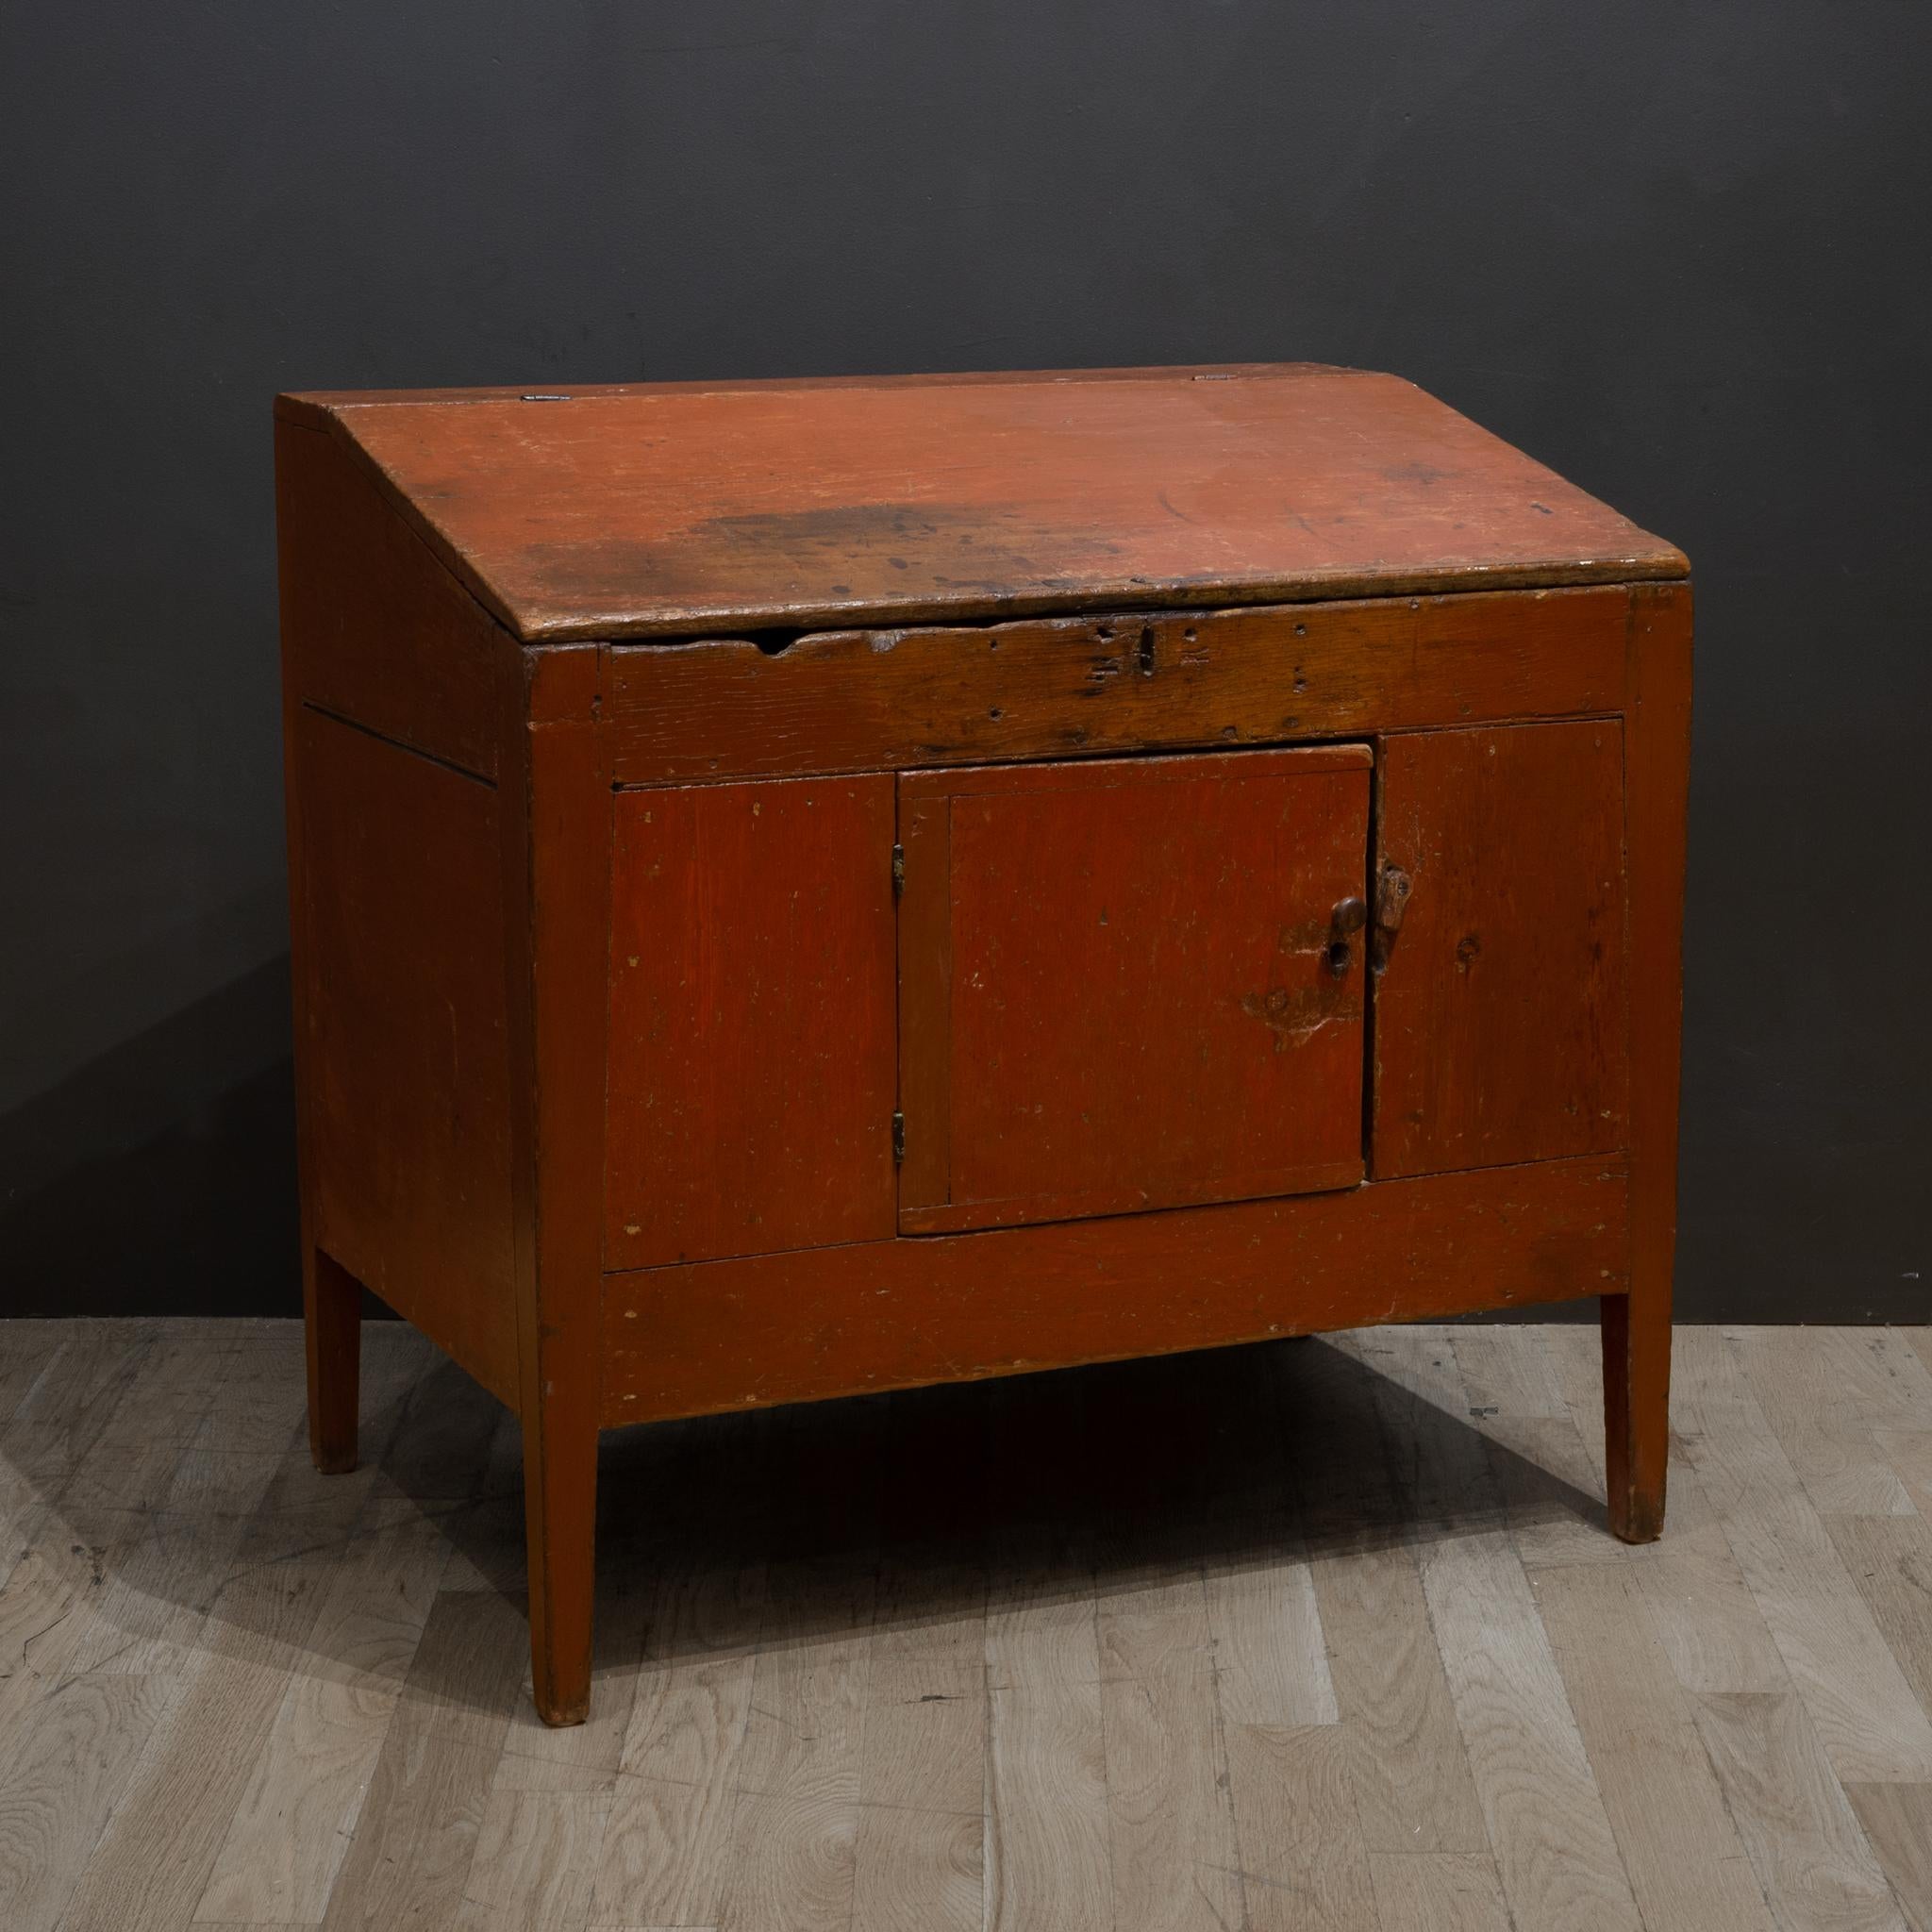 American Early-Mid 19th c. Hand Painted Slant Desk, c.1820-1840 For Sale